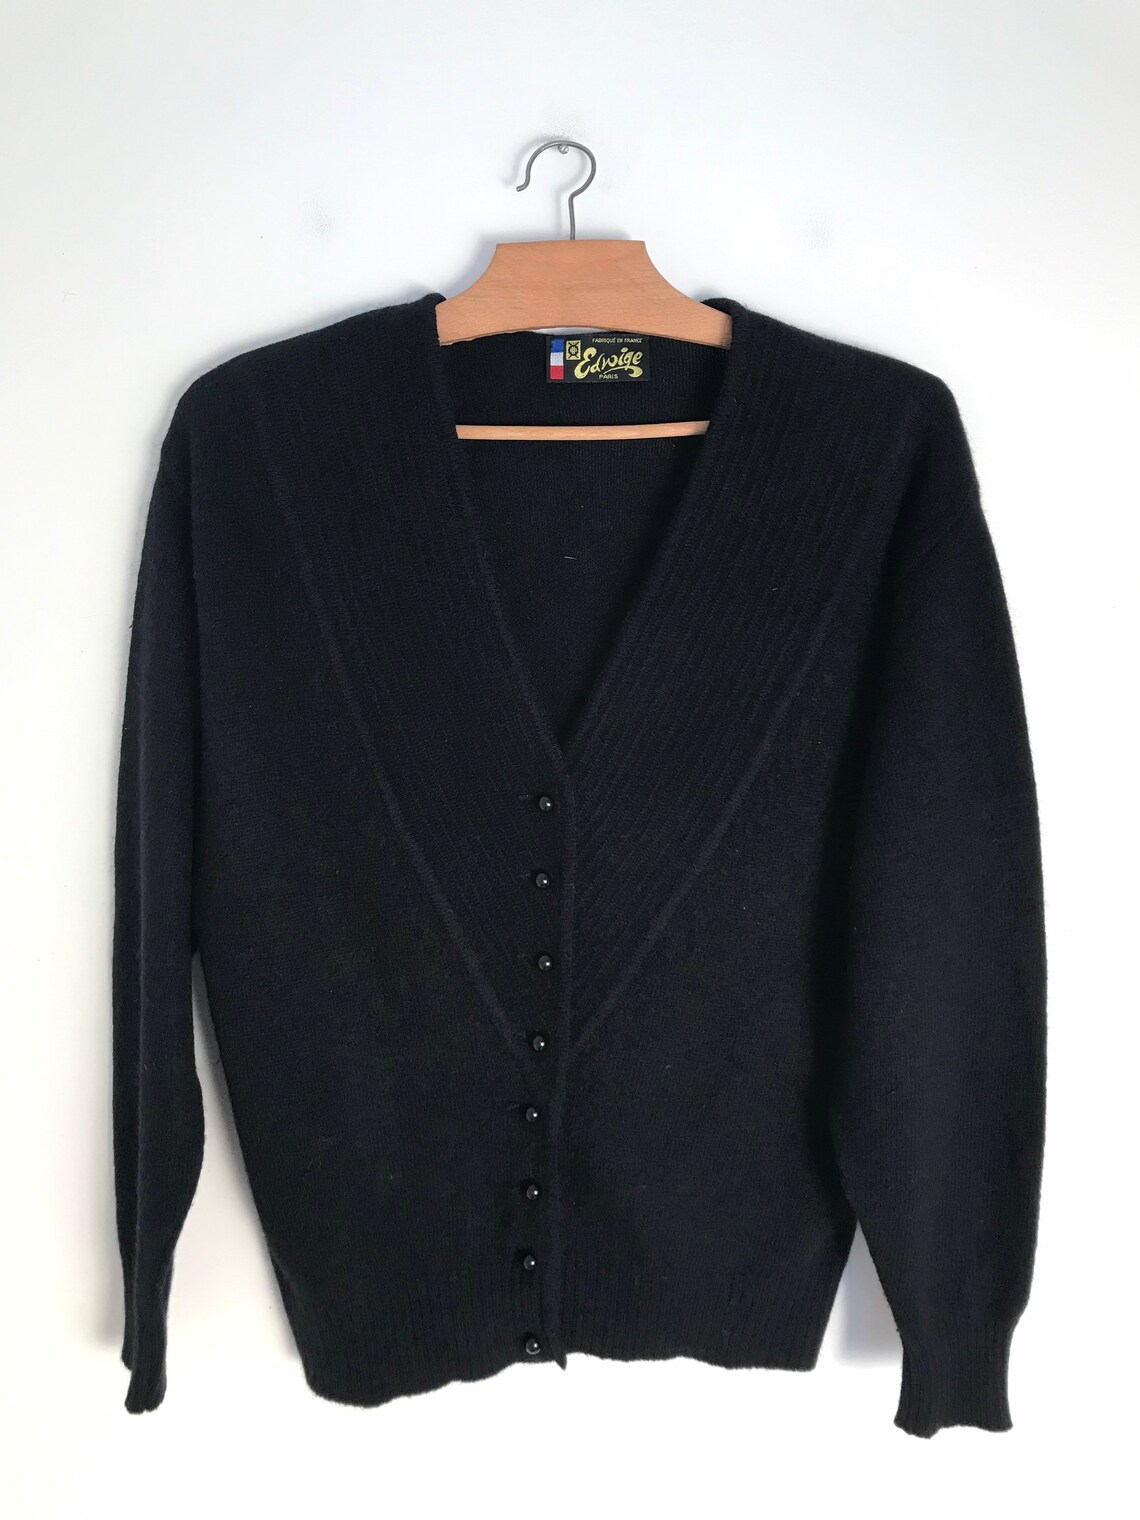 Vintage black cardigan in thin knit angora blend and with | Etsy